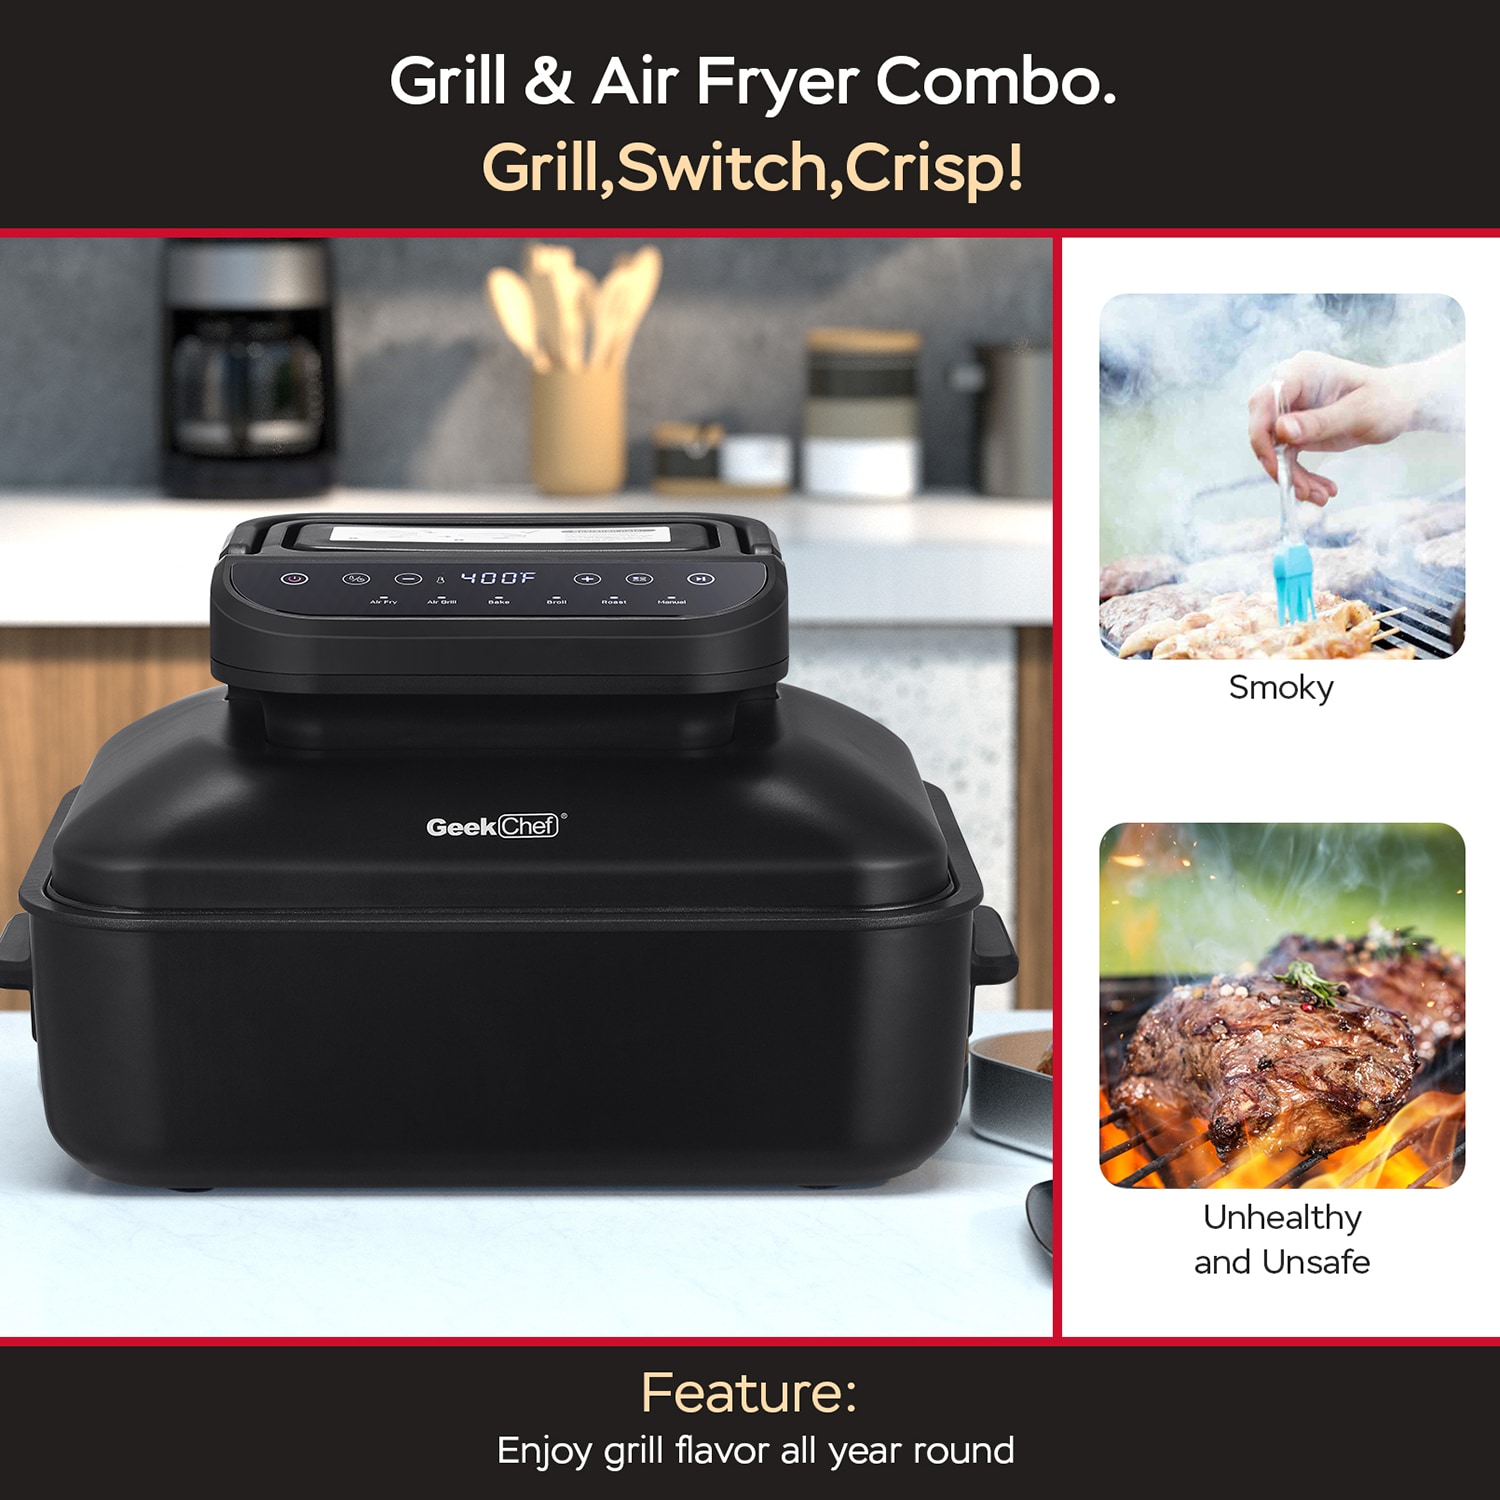 Geek Chef Black 10 Quart Air Fryer and Toaster Oven Combo - 1400W